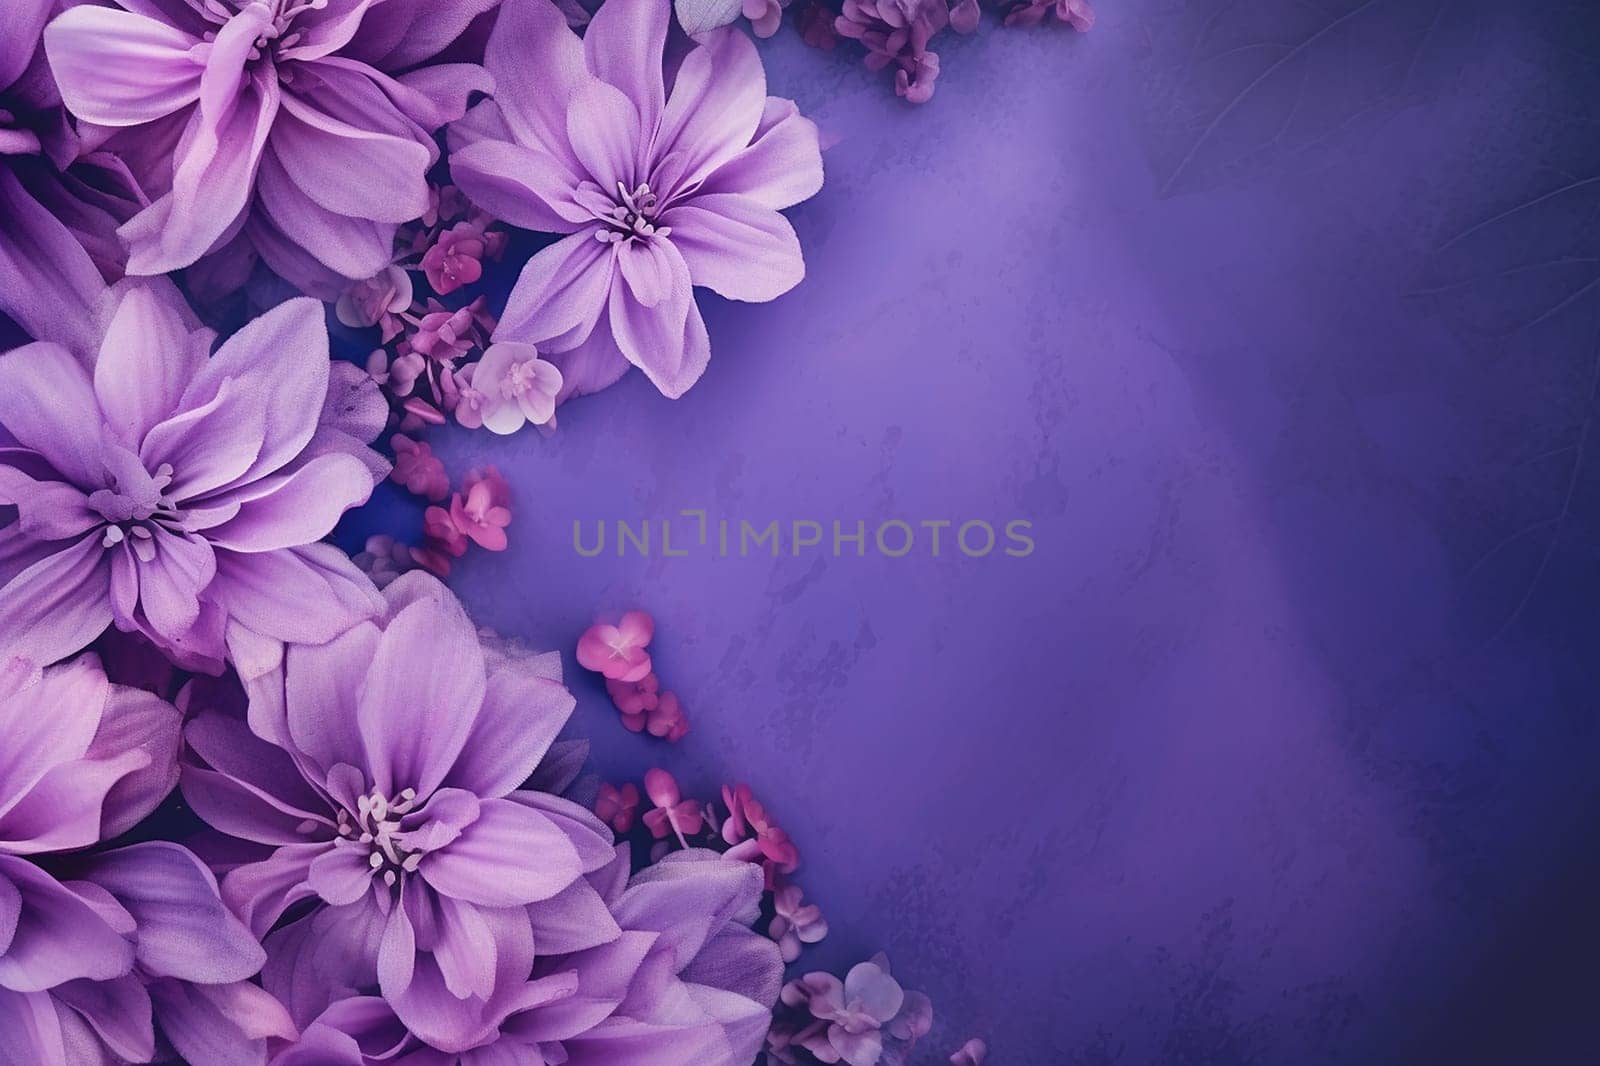 A collection of purple flowers against a blue textured background.